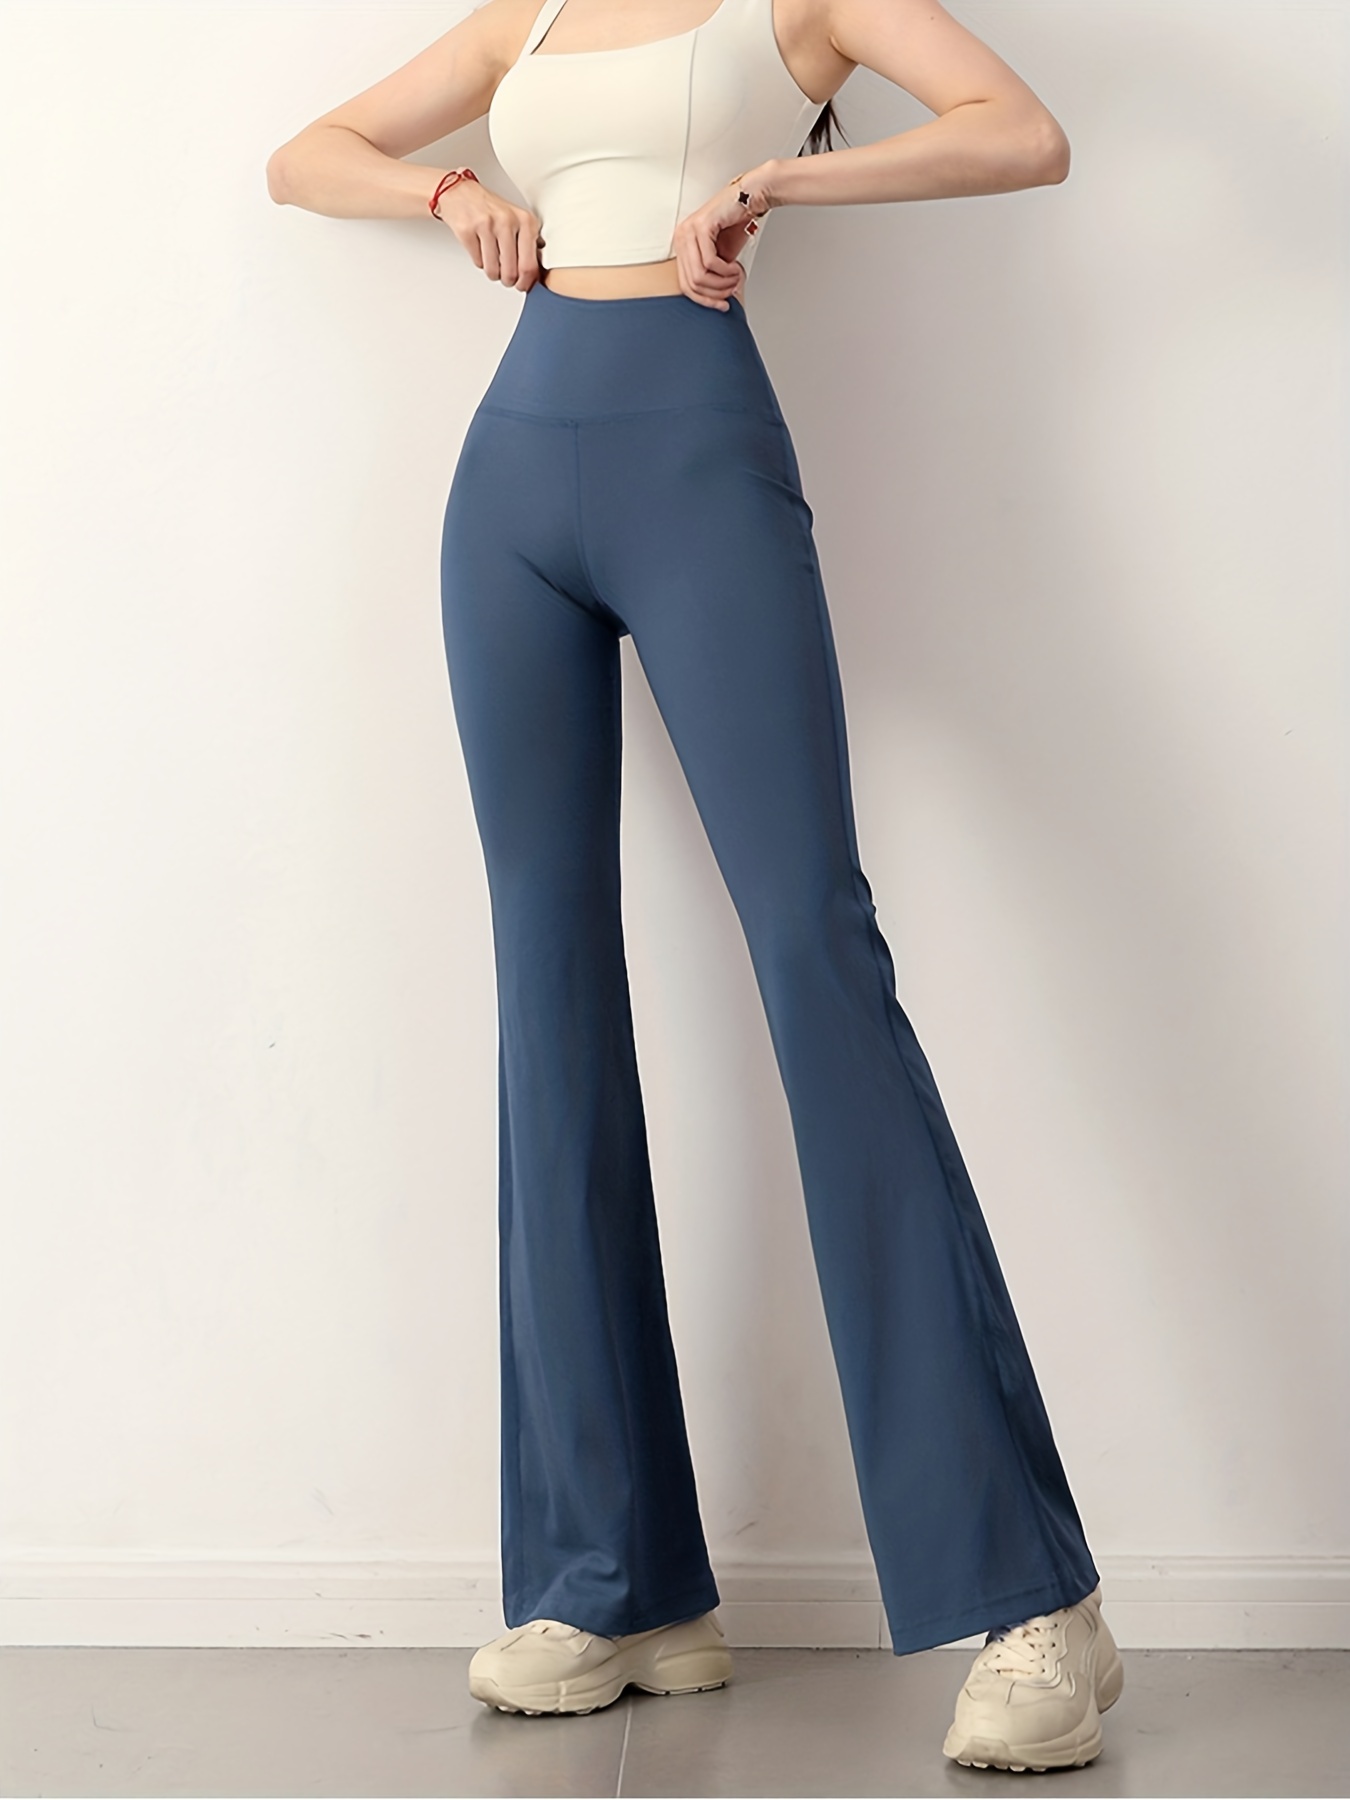 Women's Shaping High Waisted Scuba Flare Trousers